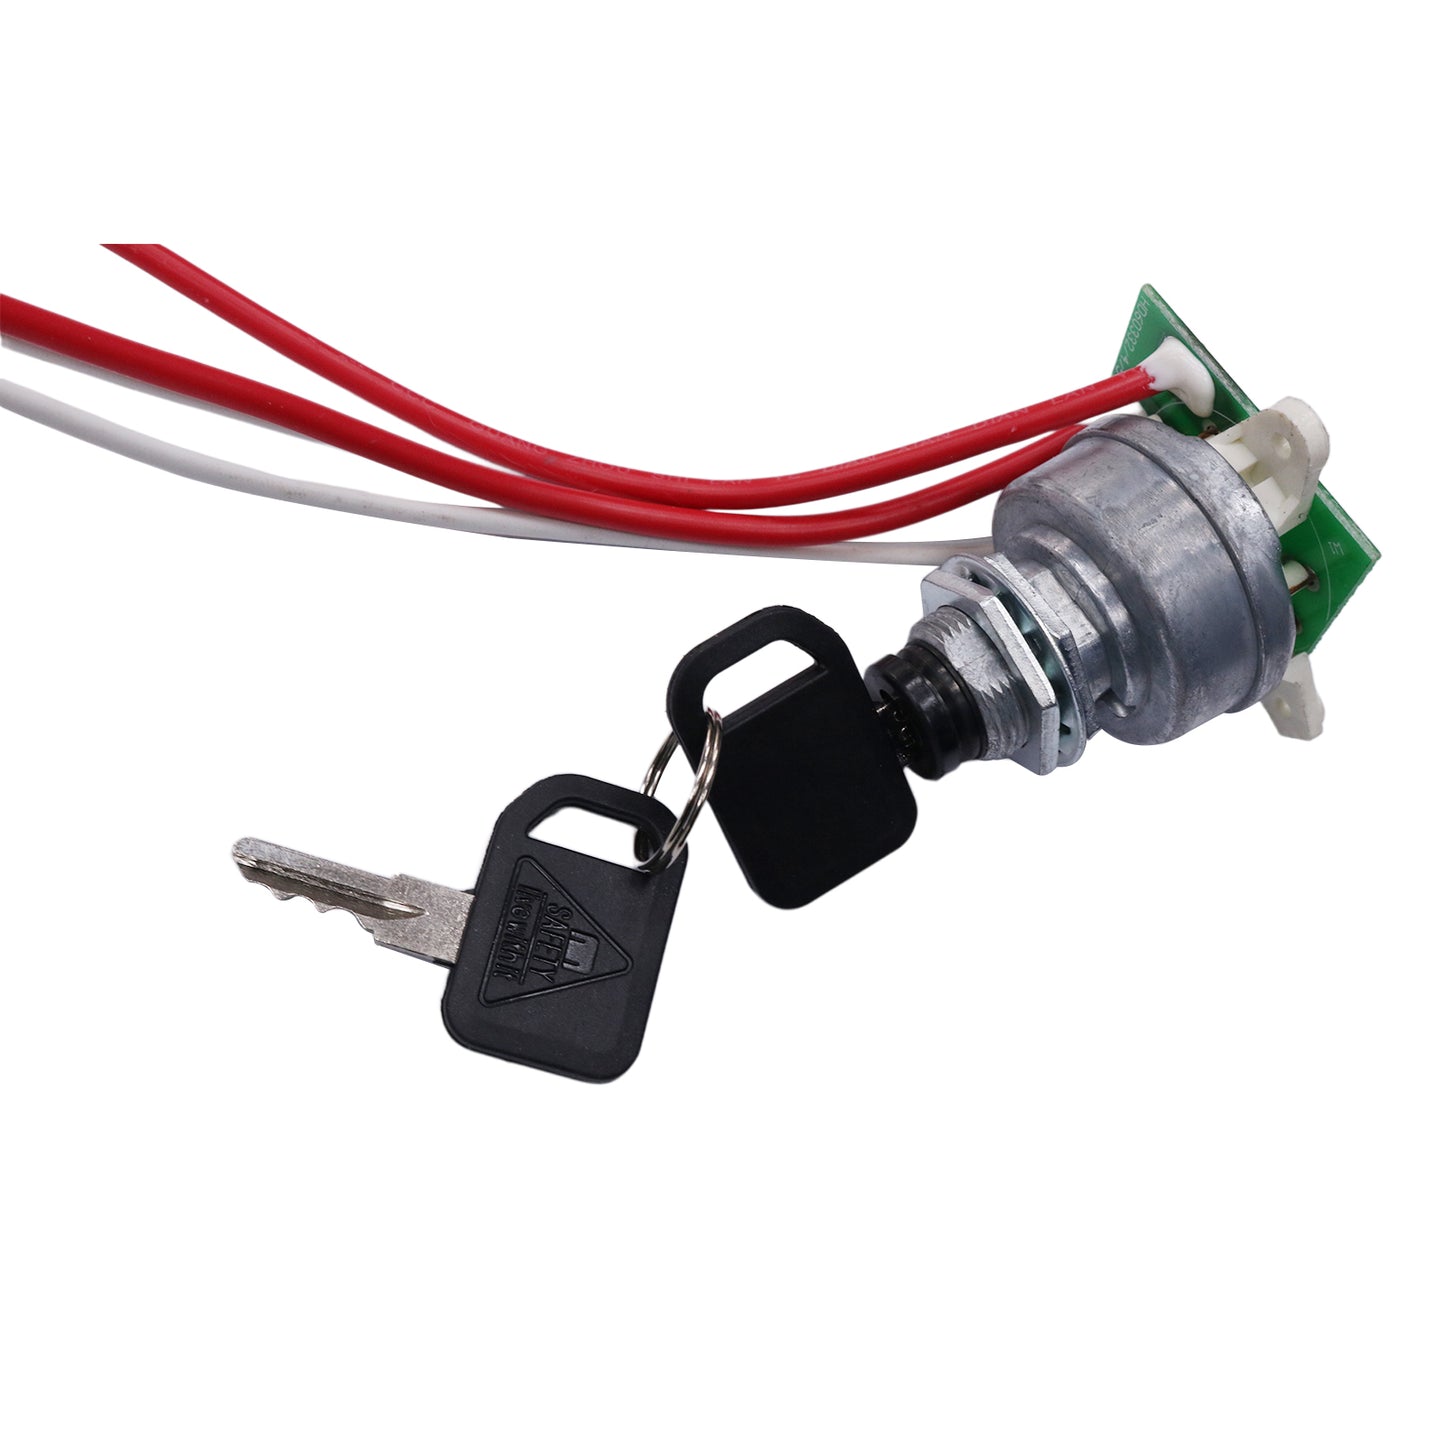 New AM124137 AM119999 Ignition Switch Module with Keys Compatible with John Deere Garden Tractors 325 335 345 Serial #s Below 070